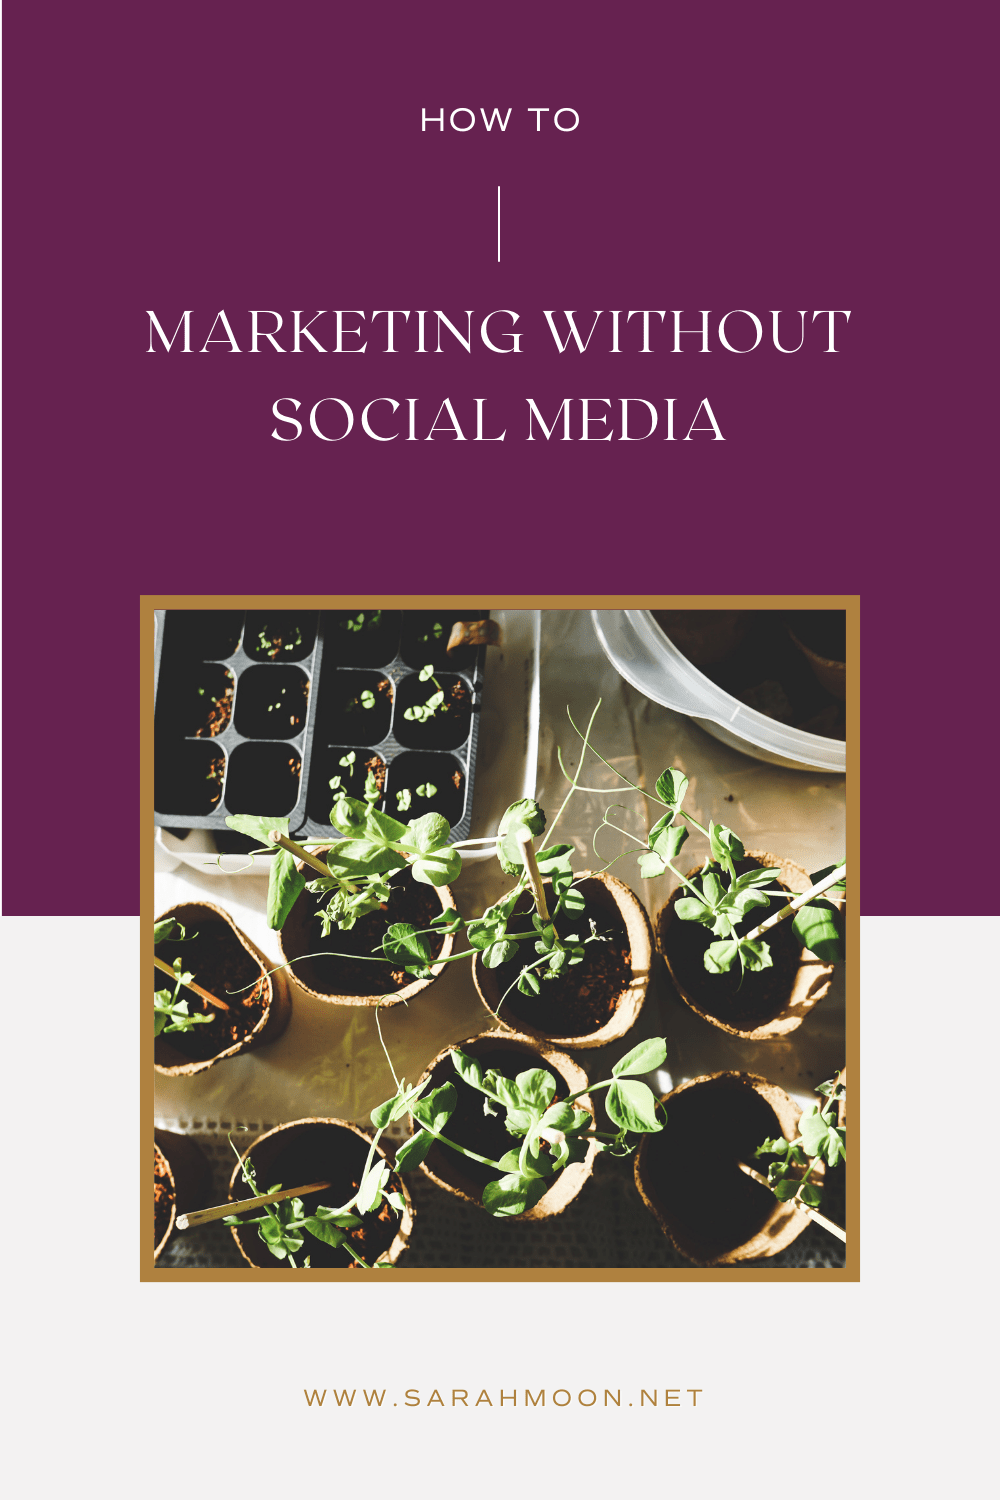 Marketing without social media - A how to guide